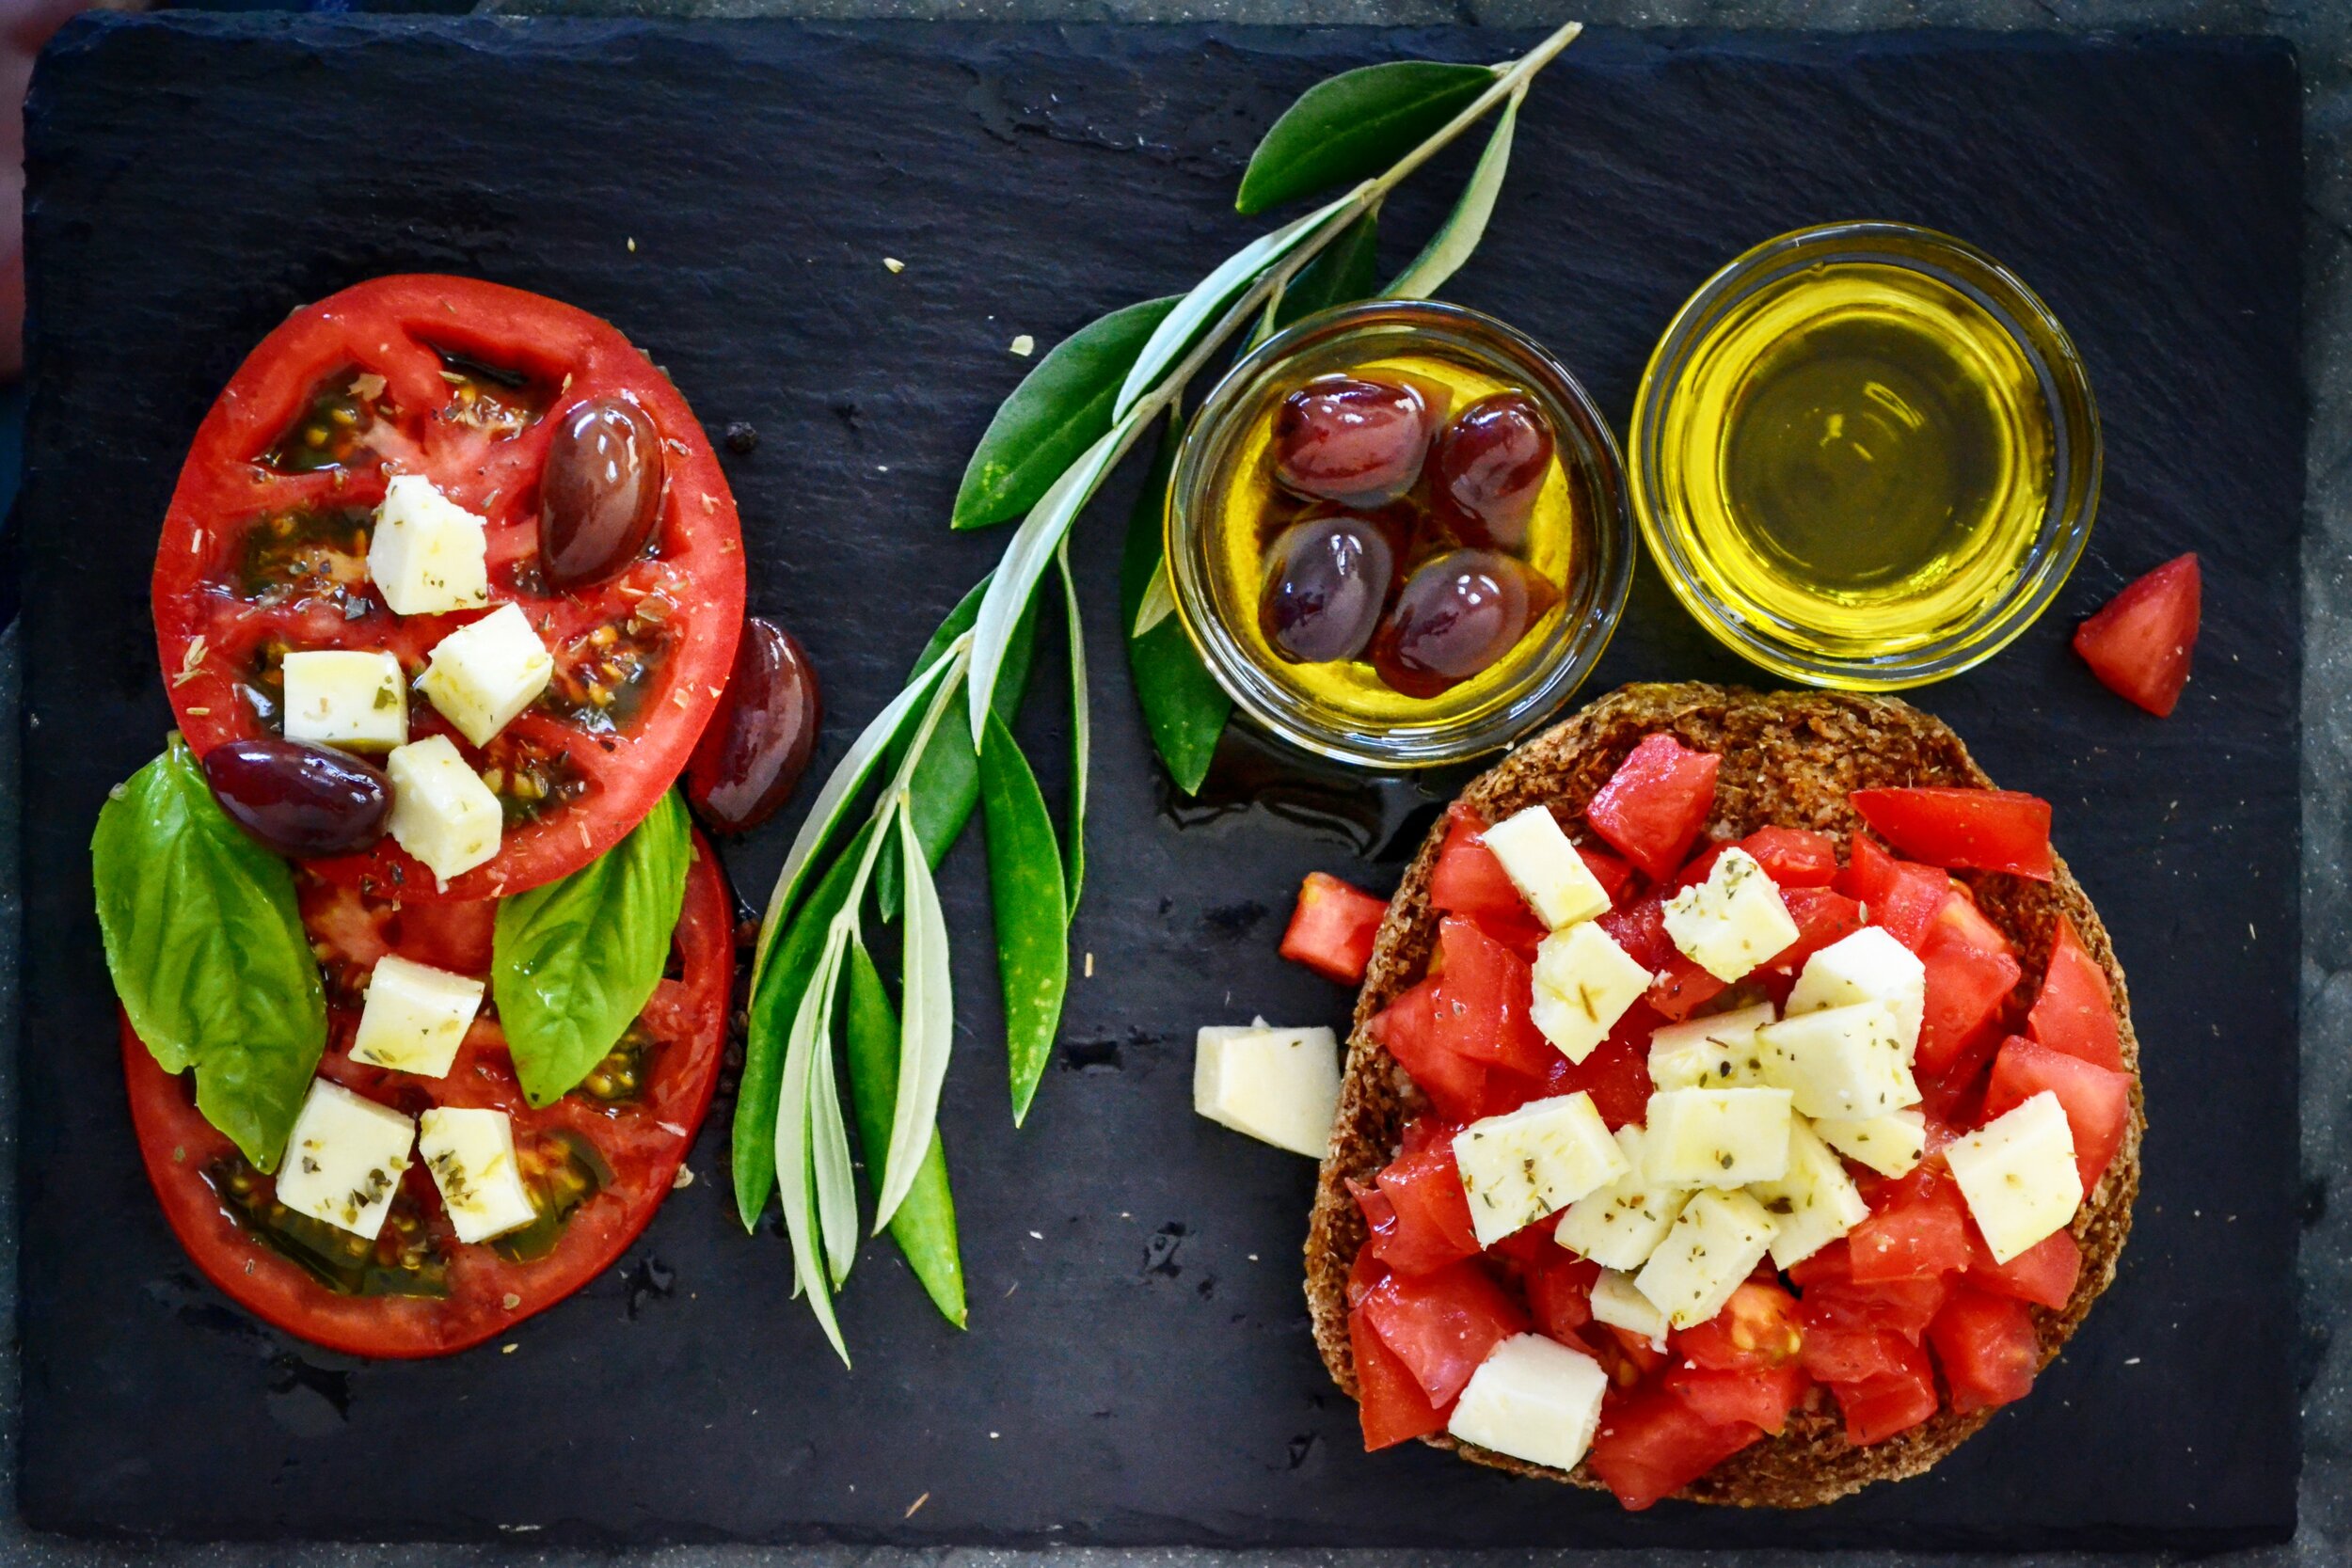 tomato-salad-with-olive-oil-1239312.jpg